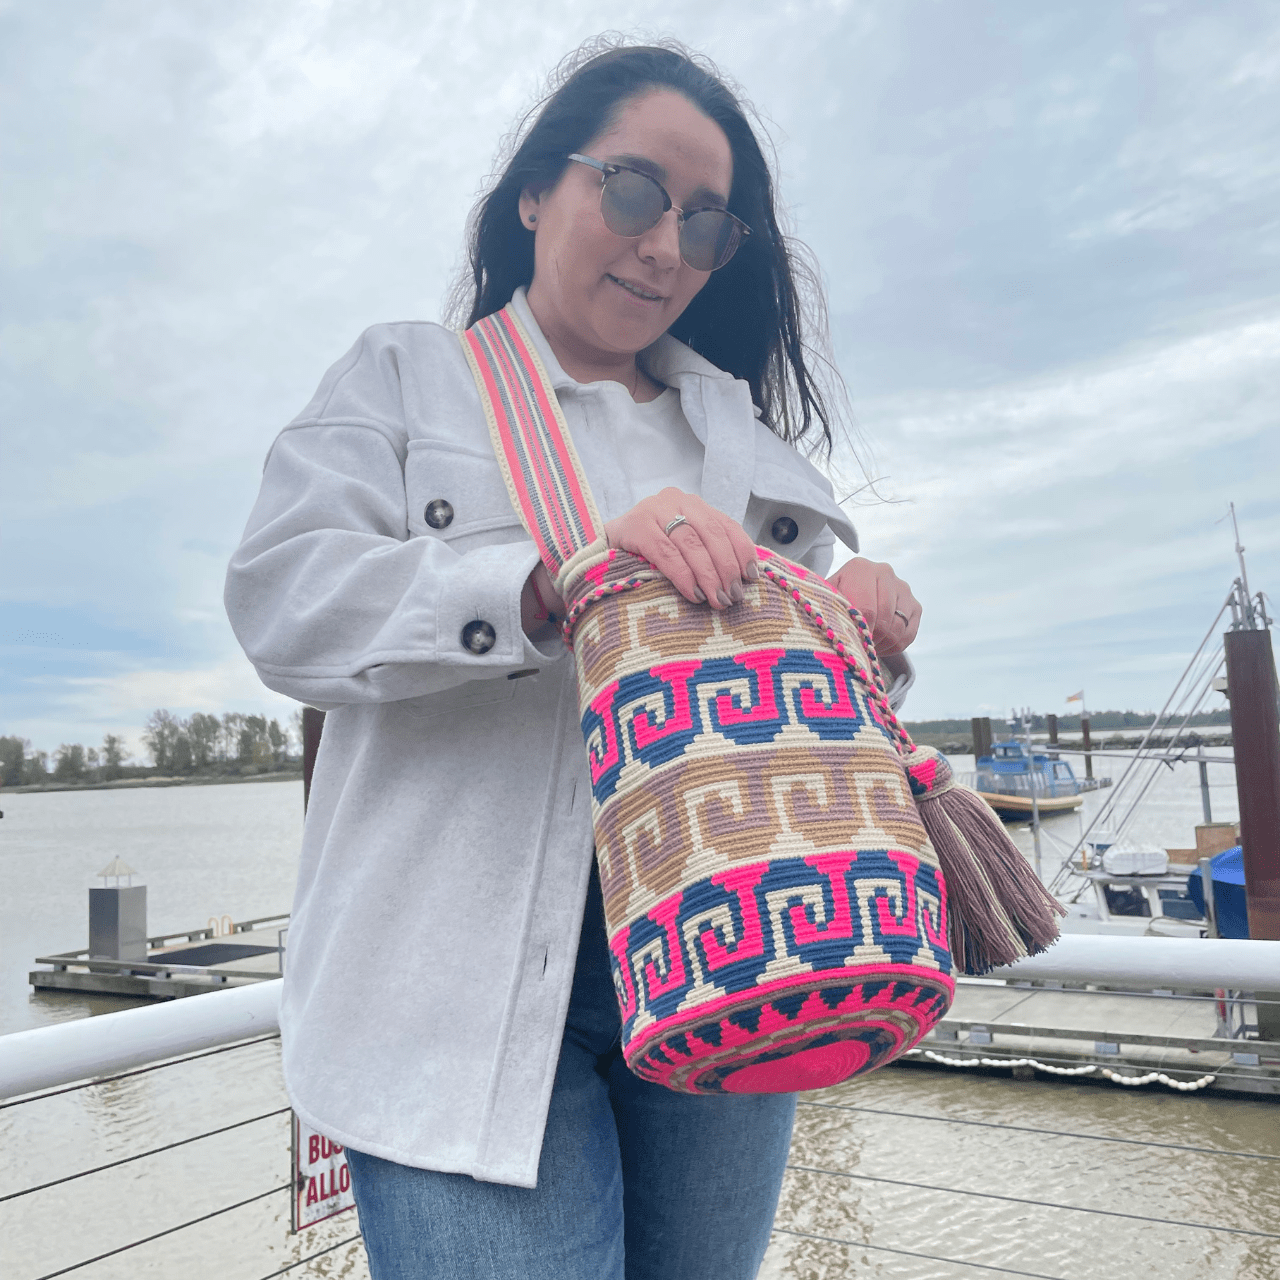 Colombian Crossbody Handmade Tapizada Wayuu Purse. Colorful Clutch With  Tassels. Artisanal Handwoven Colombian Punch Needle Bag. - Etsy | Colorful  clutches, Handmade, Purses and bags